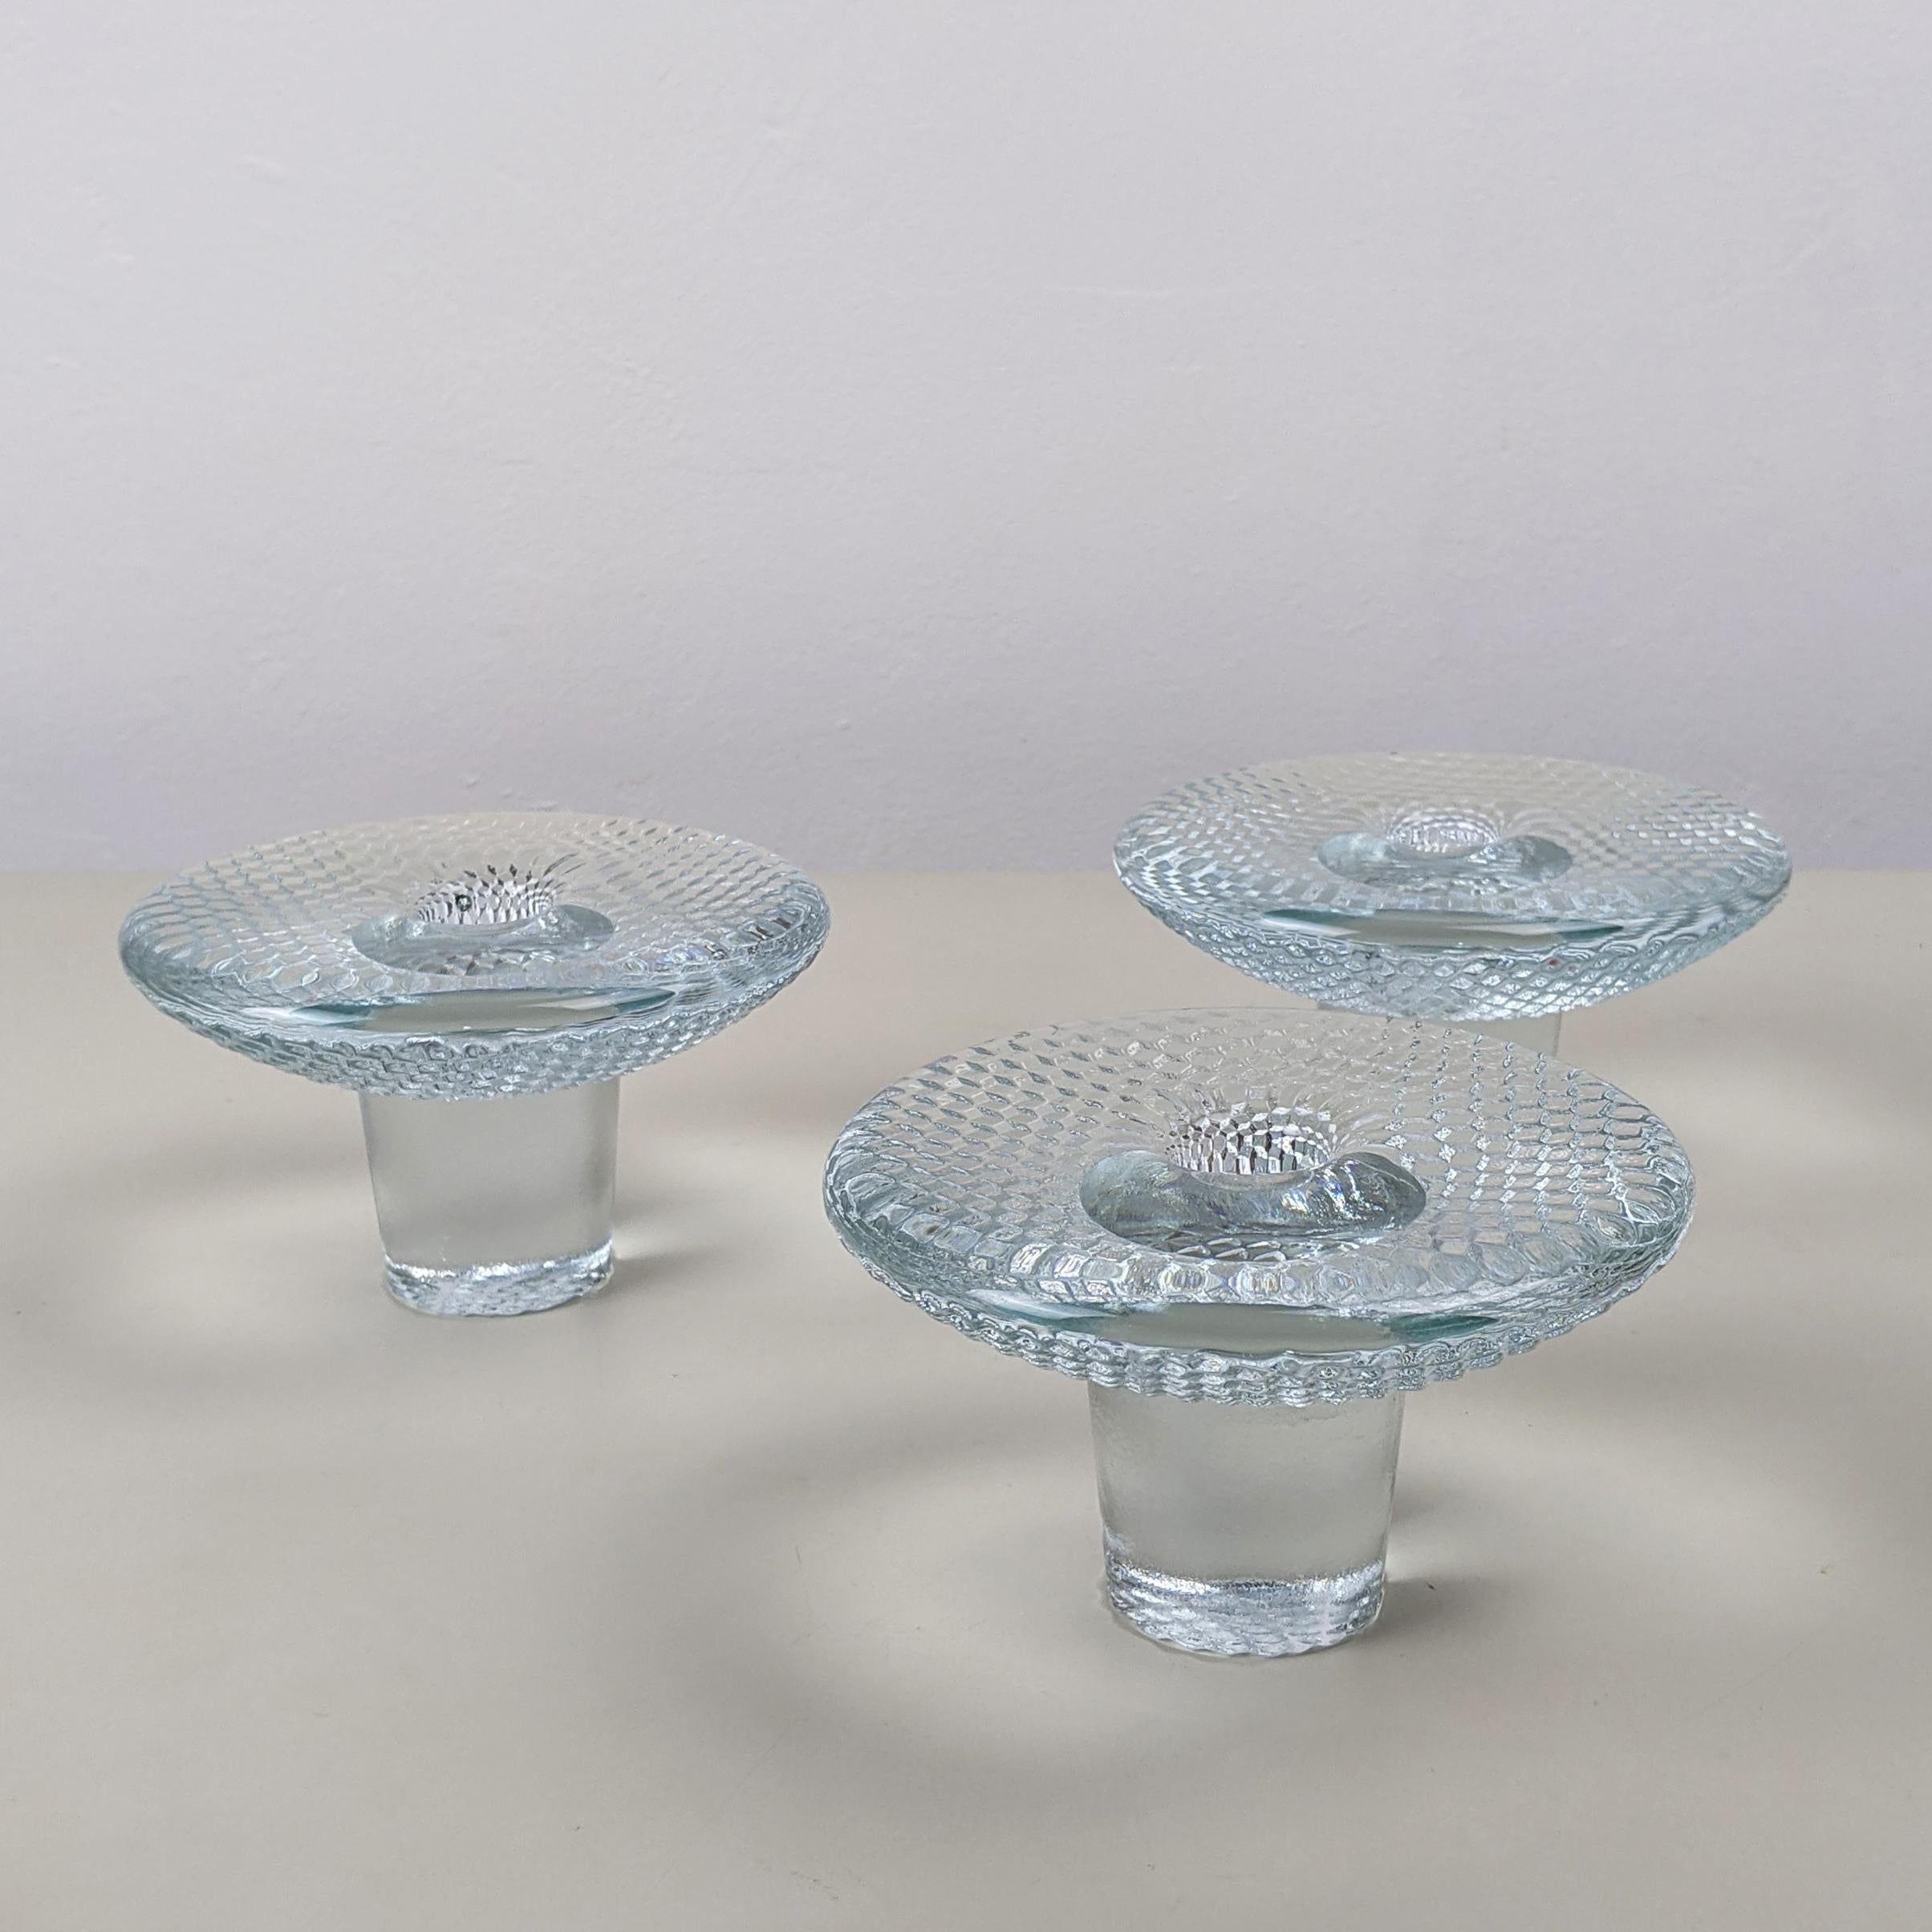 Markku Salo (attributed) for IIttala, c. 1970
Candle holders, set of 3

Clear pressed glass
Excellent condition

Dimensions, each approx..:
Height 7.5 cm
Diam. 12.5cm
Weight 783g.